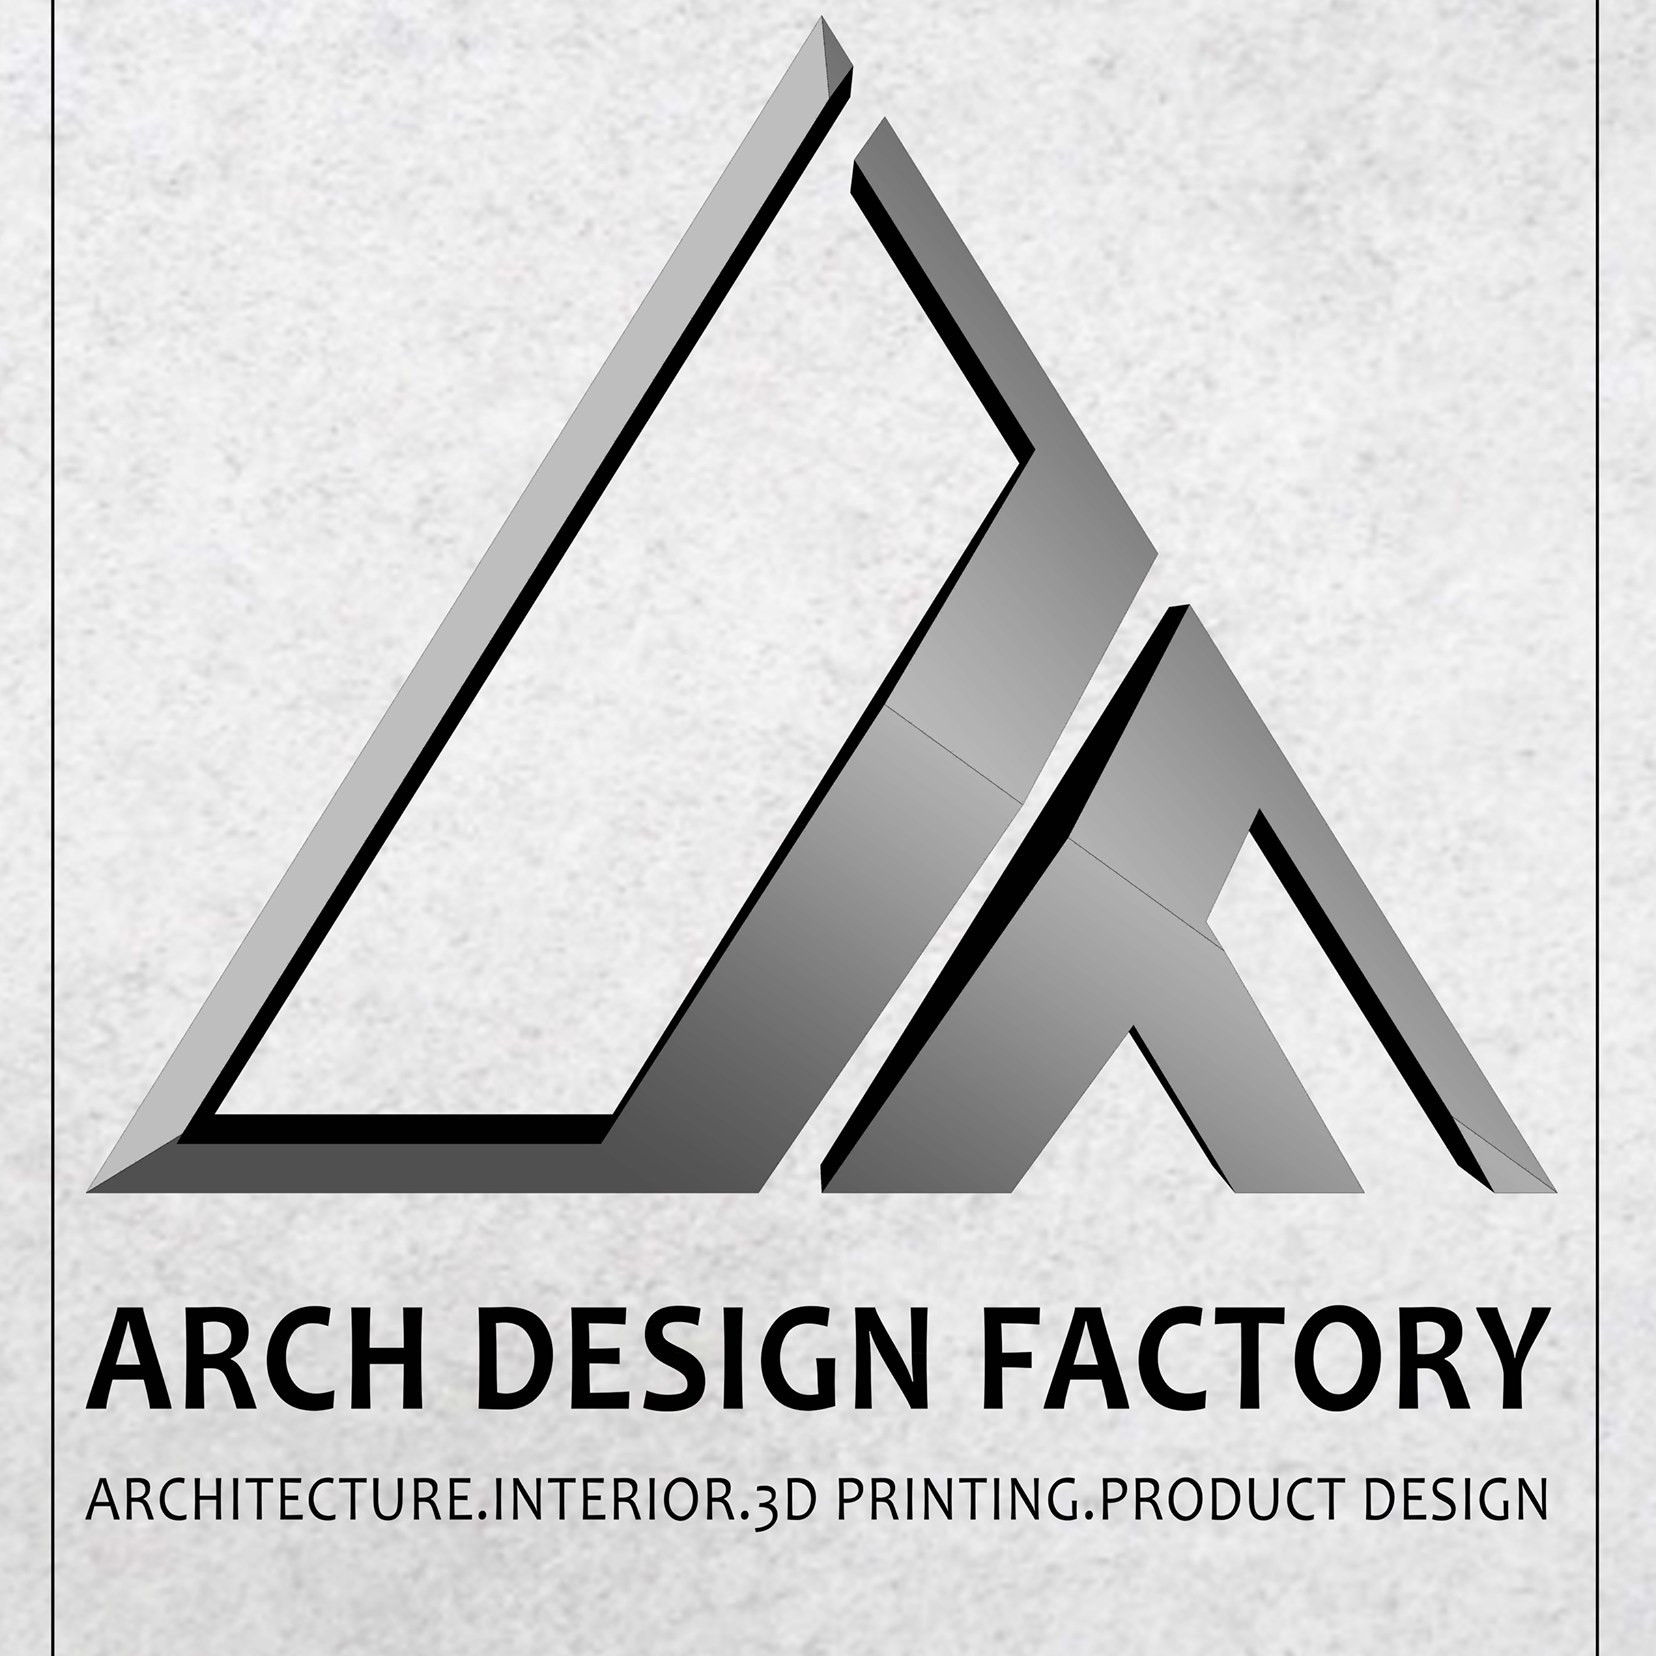 ADF ArchDesignfactory|IT Services|Professional Services